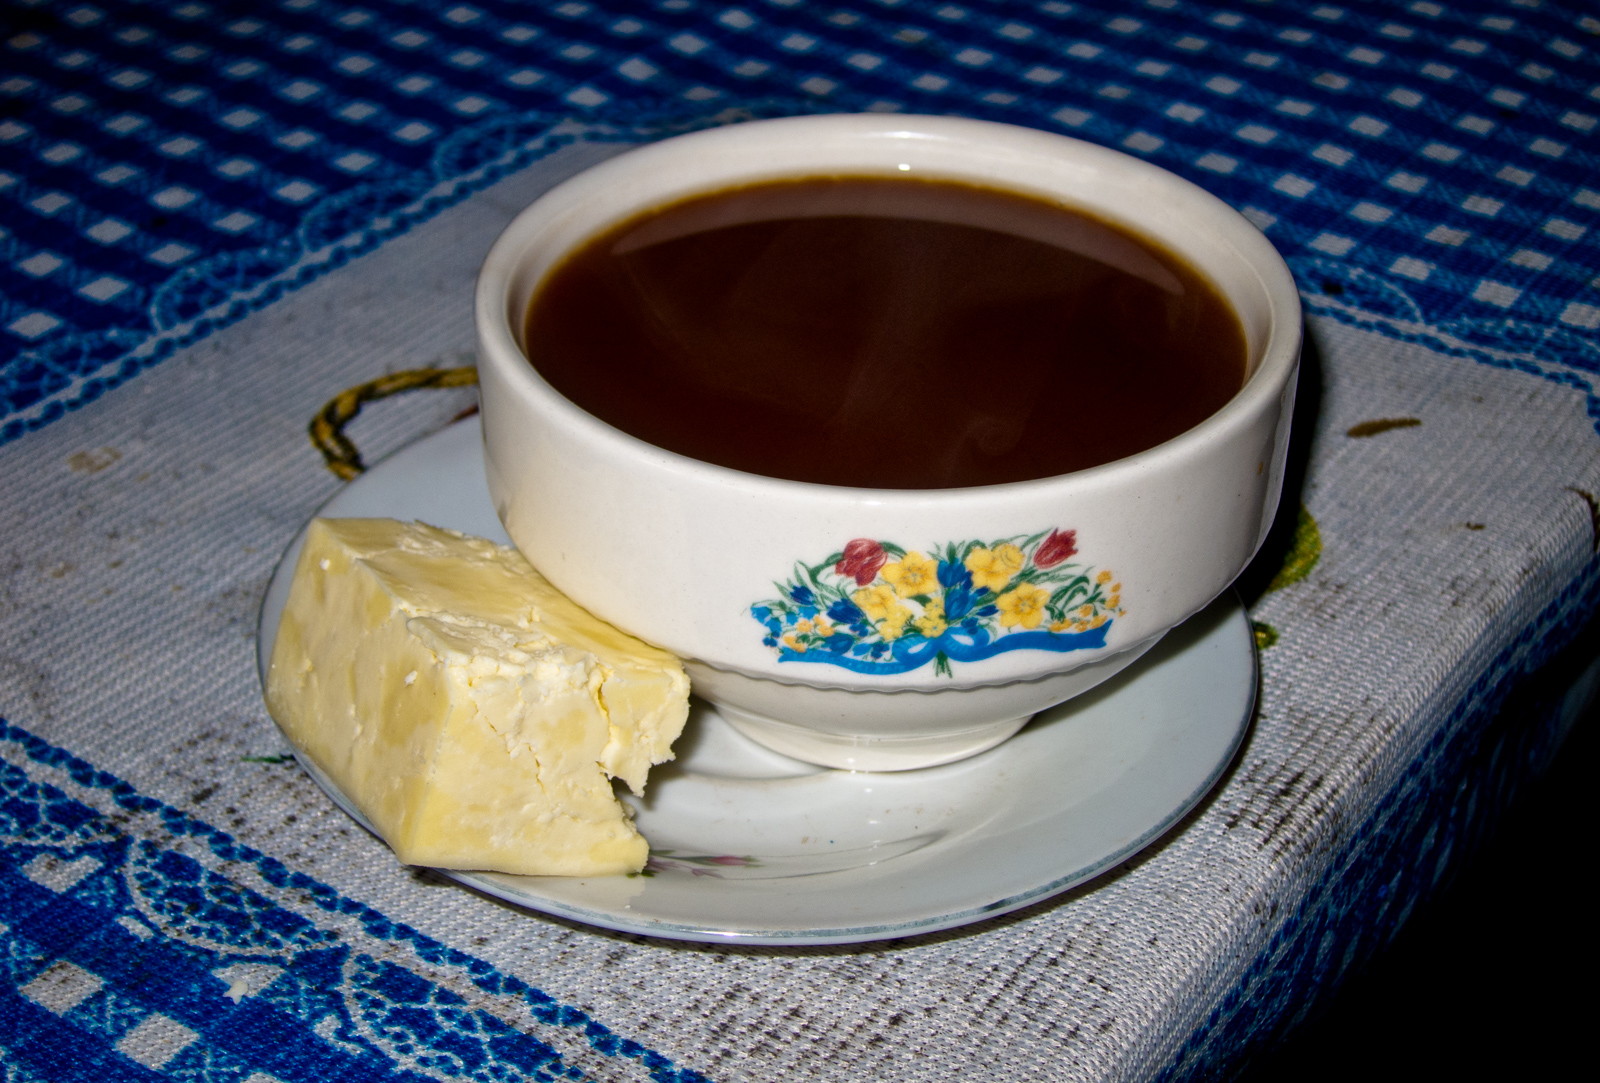 Hot chocolate and cheese is a typical Colombian food combo in Valle de Cocora.